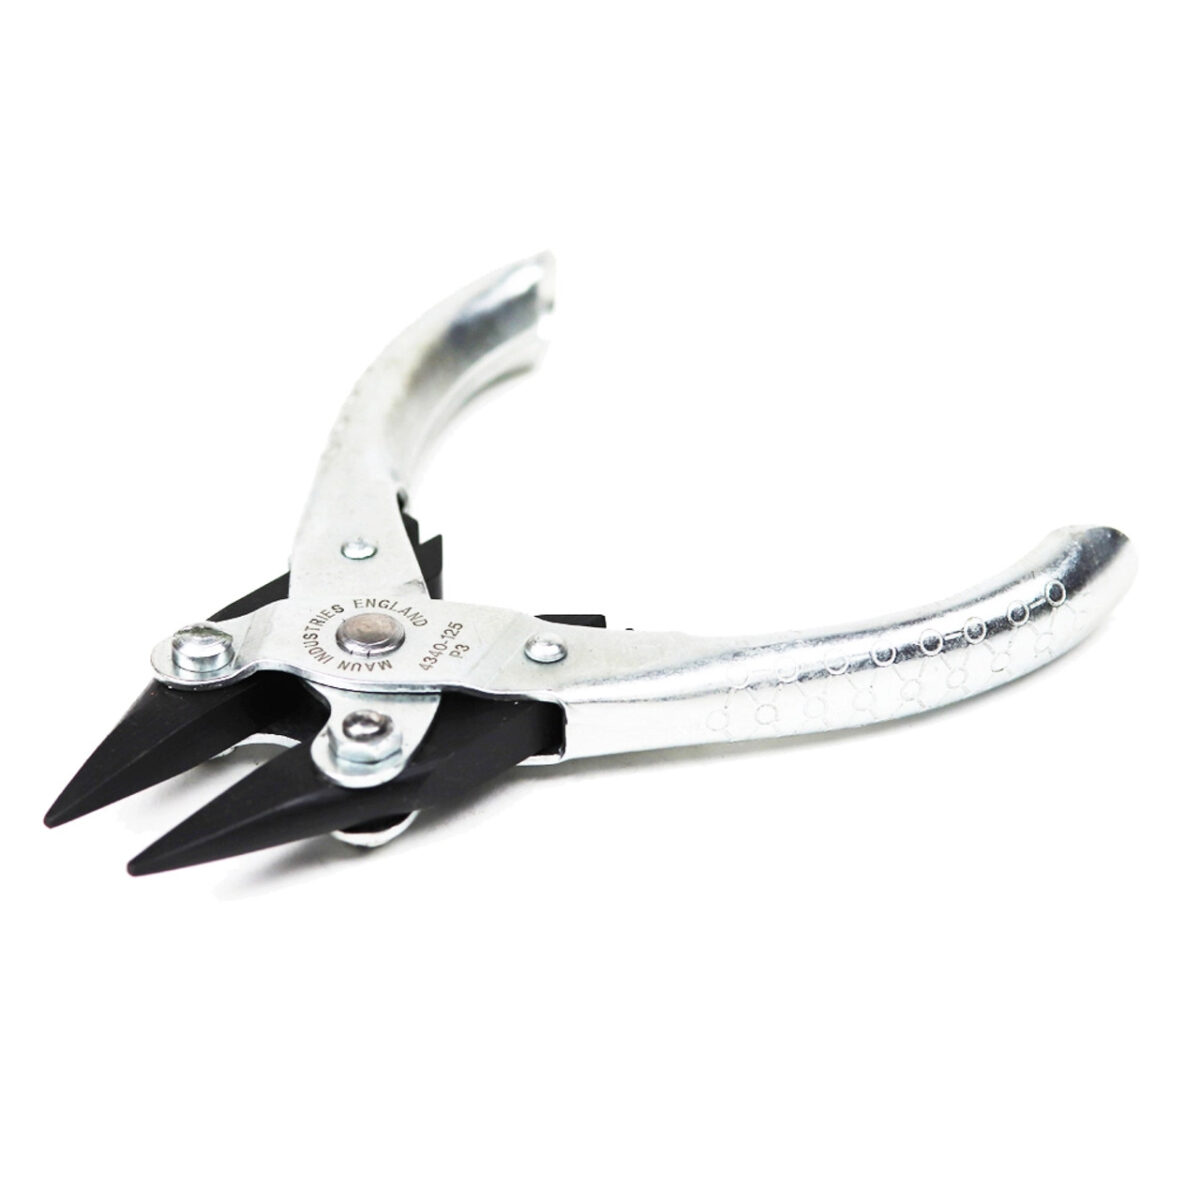 Snipe Nose Serrated Jaws Parallel Plier Jeweller's Tool 125mm Maun 4330-125